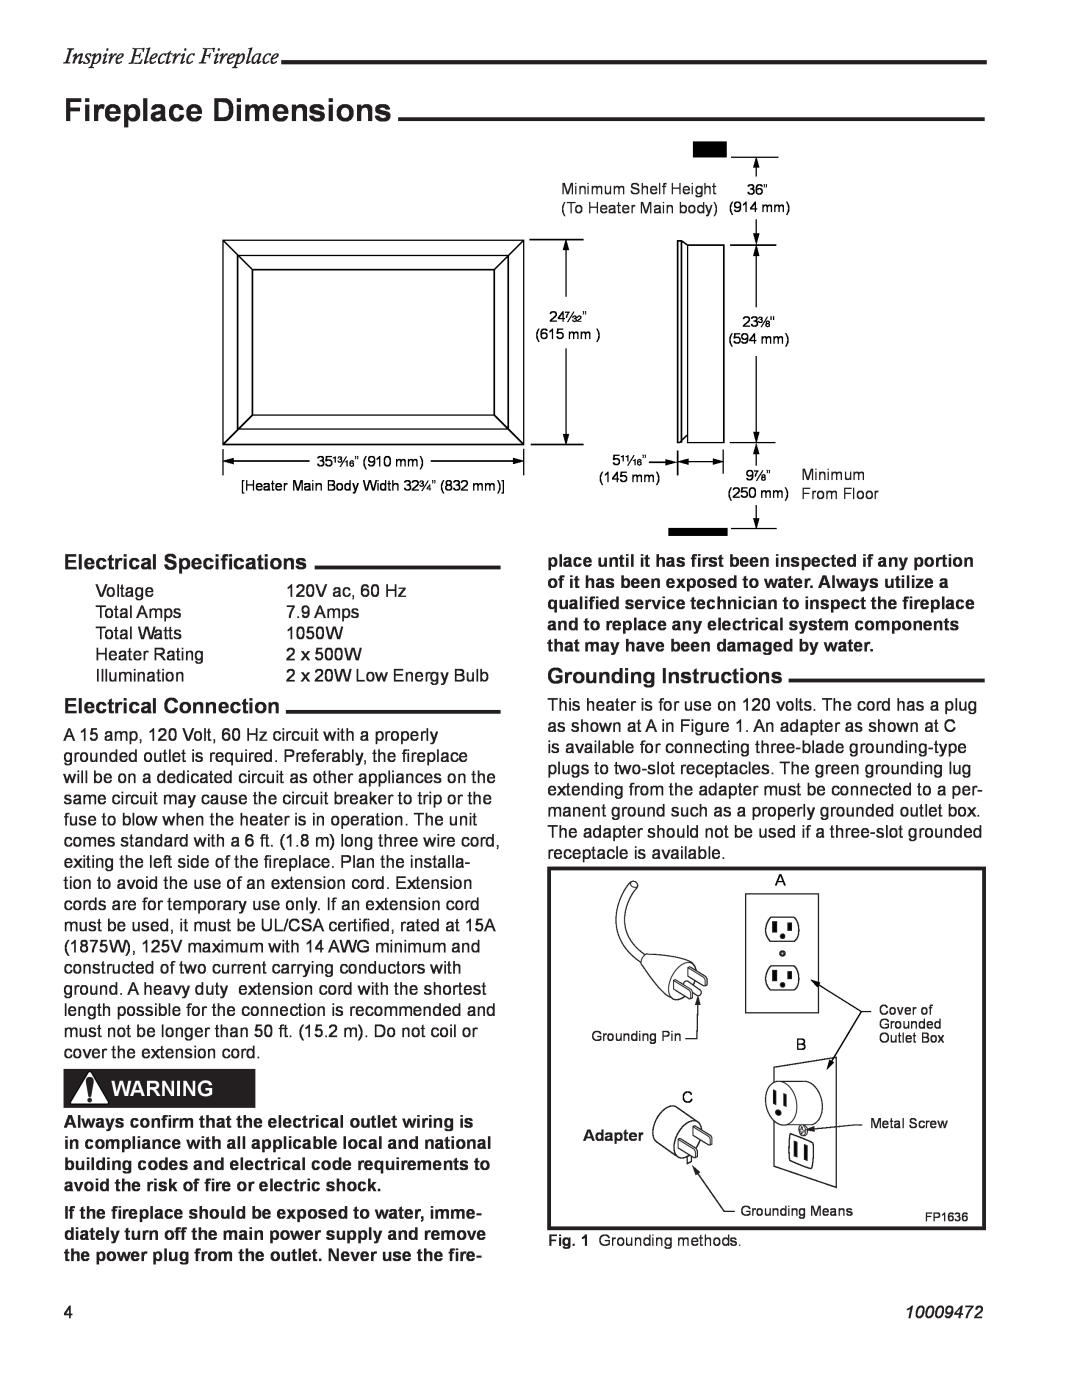 CFM Corporation ICVCEFP01 manual Fireplace Dimensions, Inspire Electric Fireplace, Electrical Speciﬁcations, 10009472 